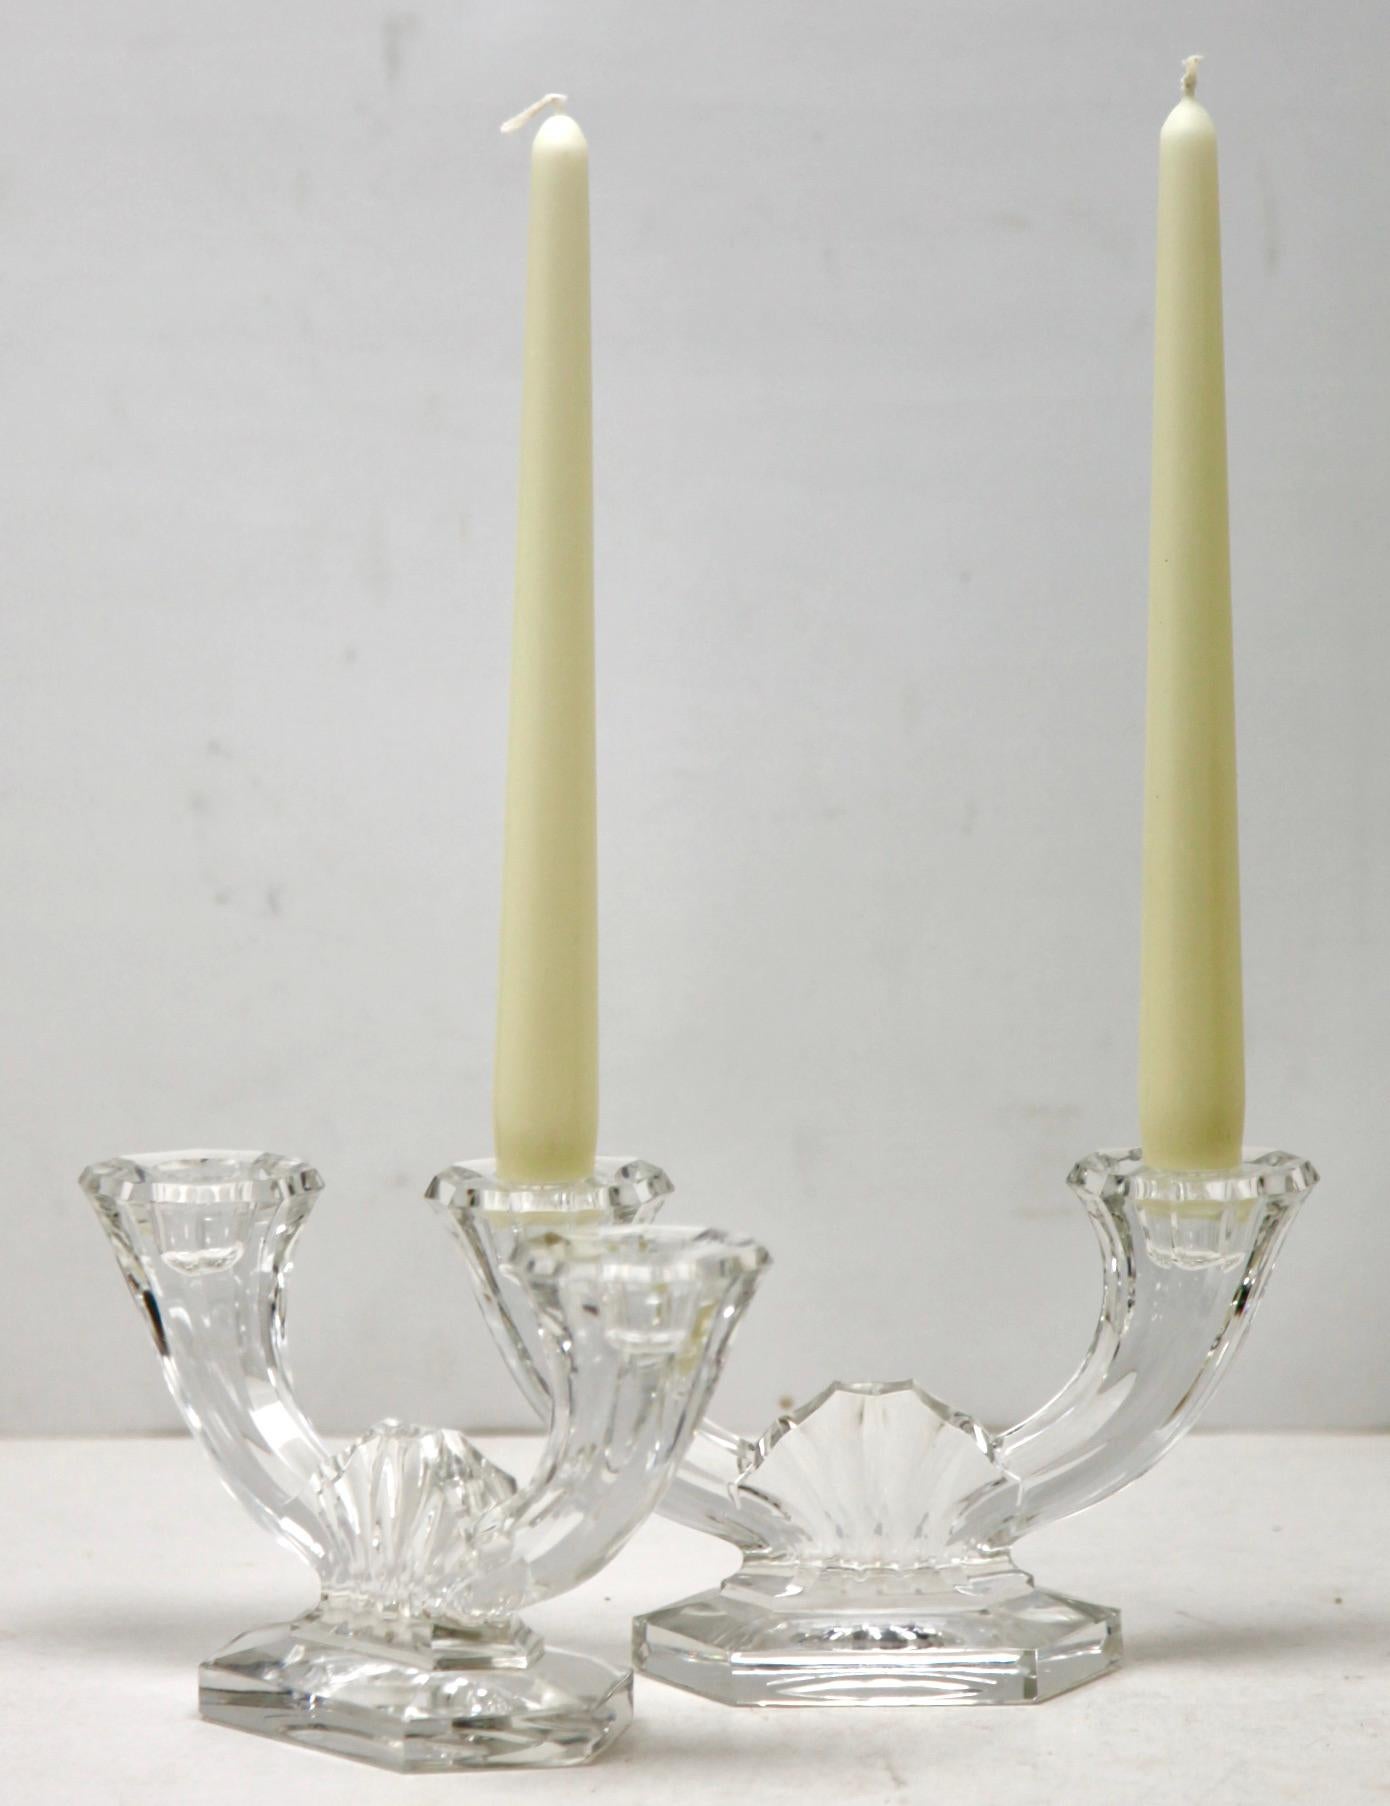 Val Saint Lambert signed 1935, Belgium
Pair of very nice clear Crystal Art Deco candlesticks made by Val Saint-Lambert. 
Signed.

  








 



























